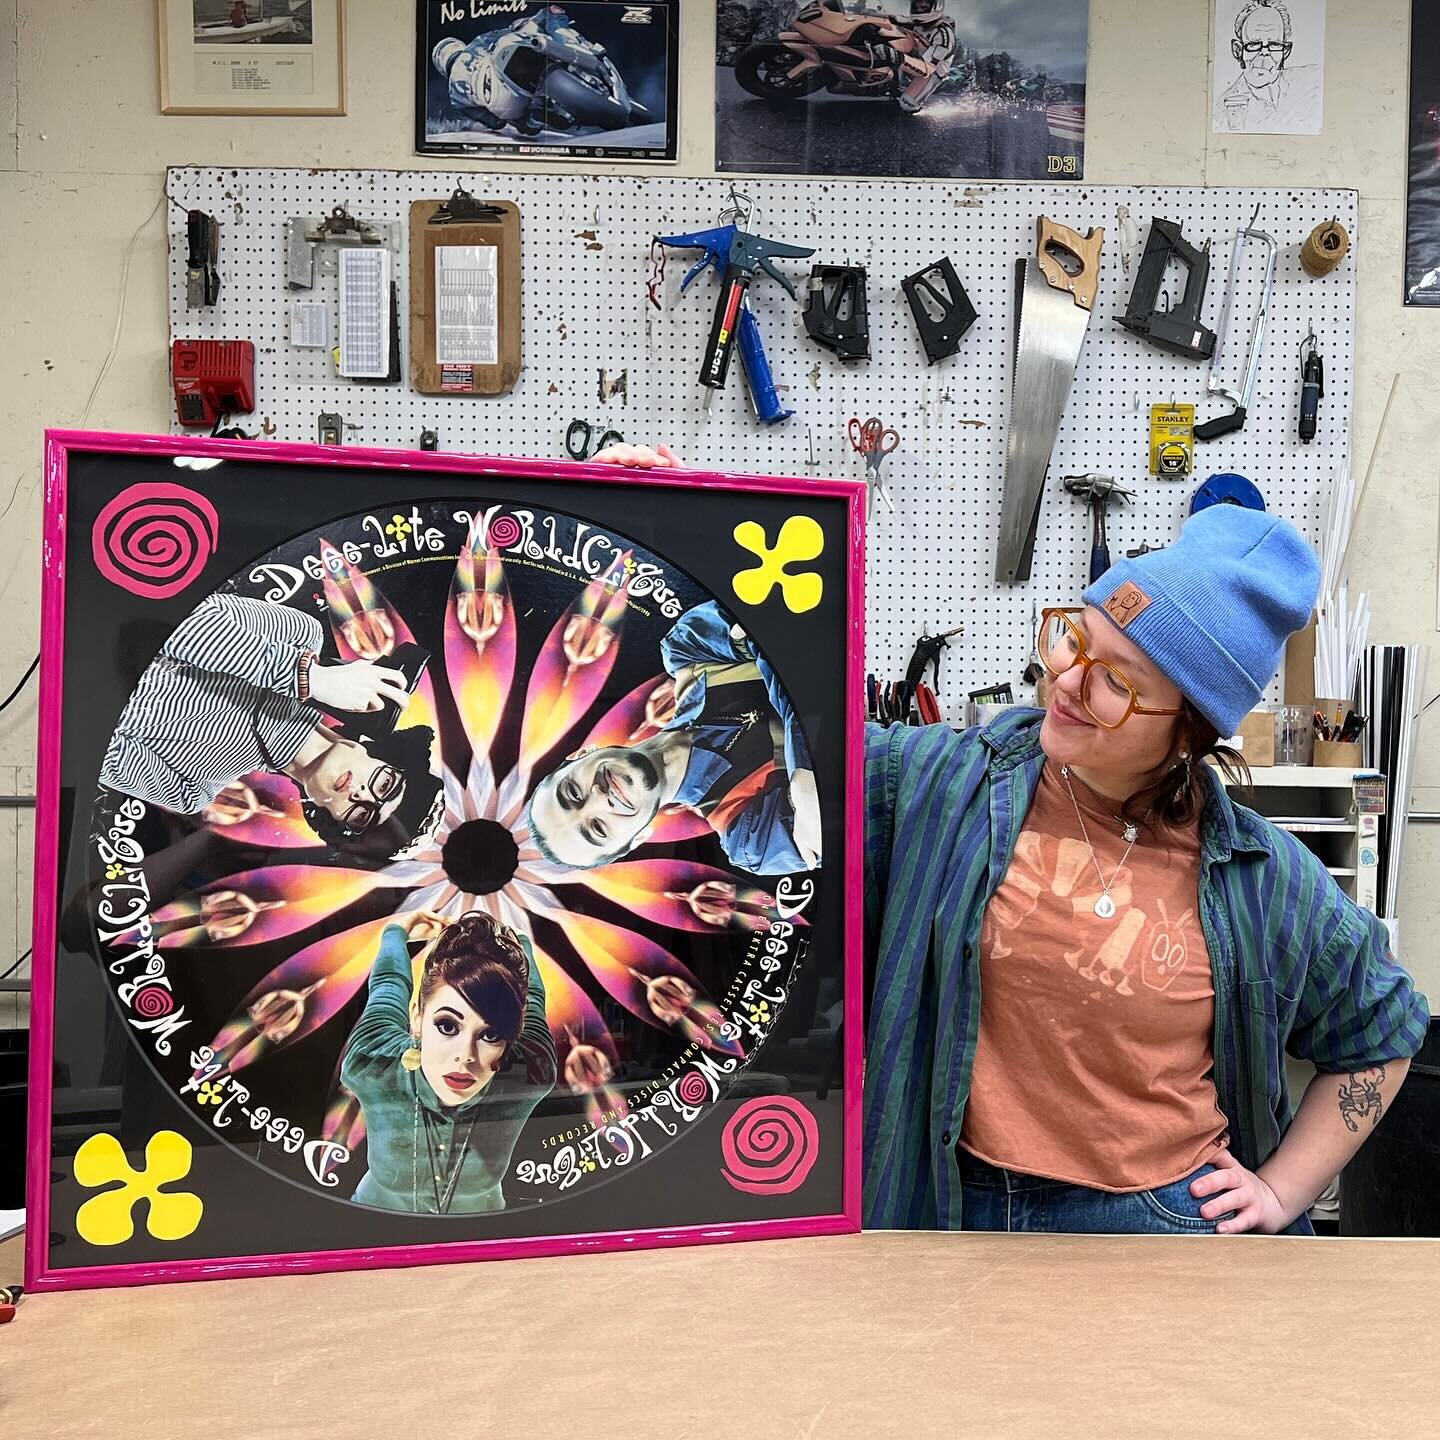 The real beauty of custom framing lies in just how custom the process can actually get..This morning Maddie finished hand-painting these corner decals on the matboard for this awesome Deee-Lite poster that was brought into the shop a few weeks back. 